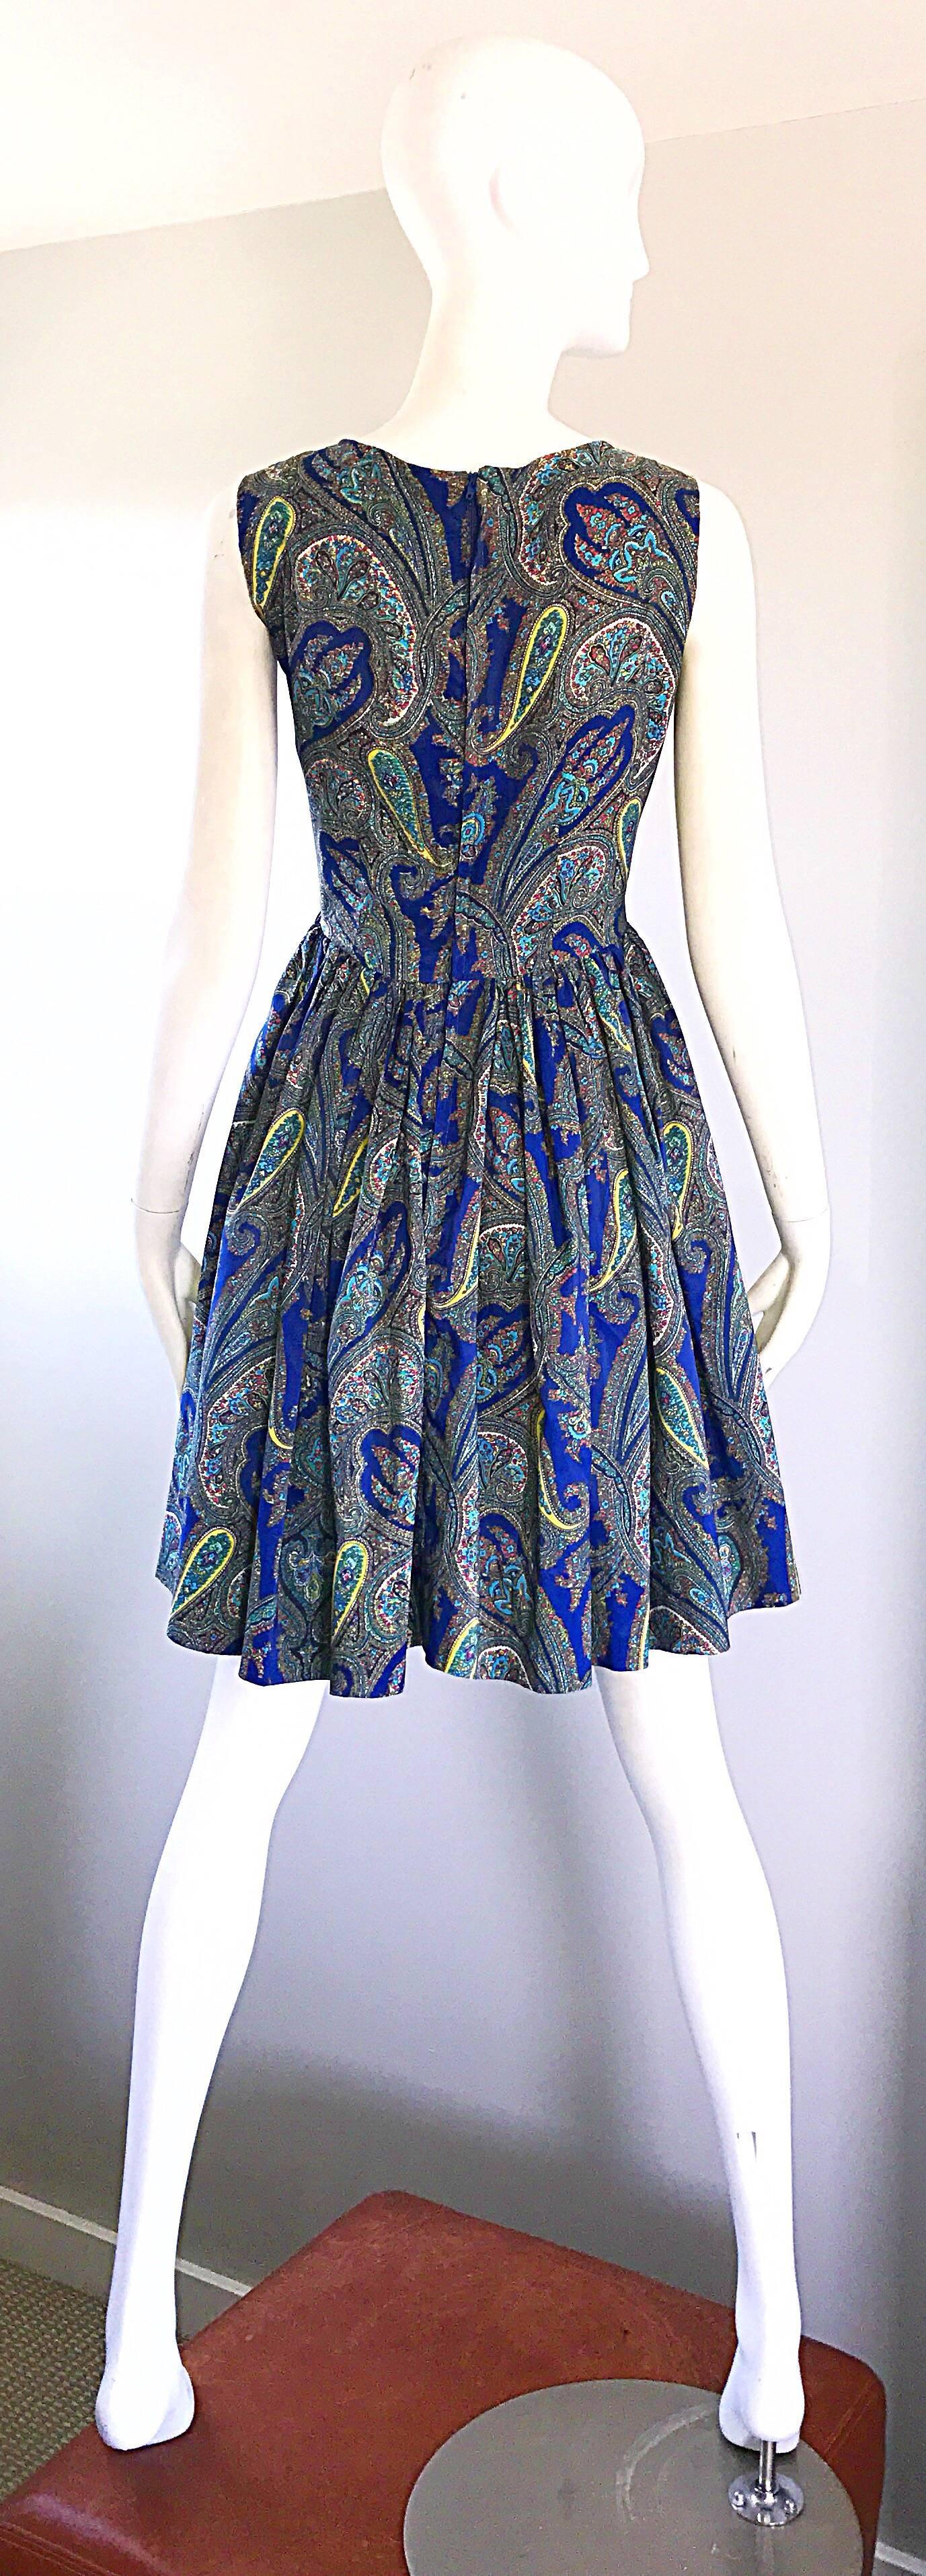 1950s Gorgeous Blue Paisley Fit n' Flare Vintage 50s Sleeveless Silk Dress In Excellent Condition For Sale In San Diego, CA